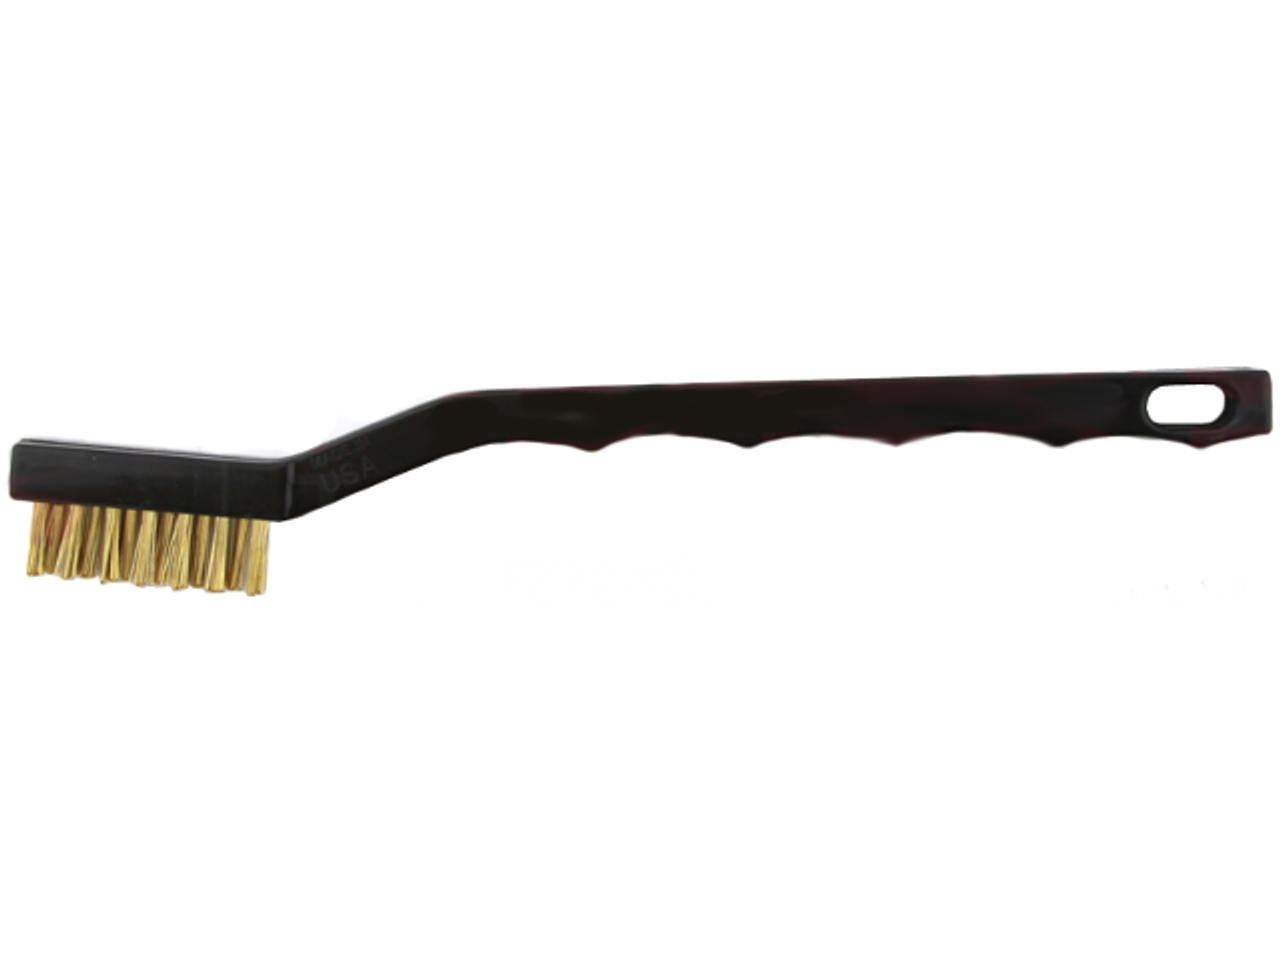 https://cdn11.bigcommerce.com/s-48gxyyxkag/images/stencil/1280x1280/products/25845/68768/Justman_750480_Small_Brass_Utility_Brush_Toothbrush_Style_-_B7975-2__84372.1660332005.png?c=1